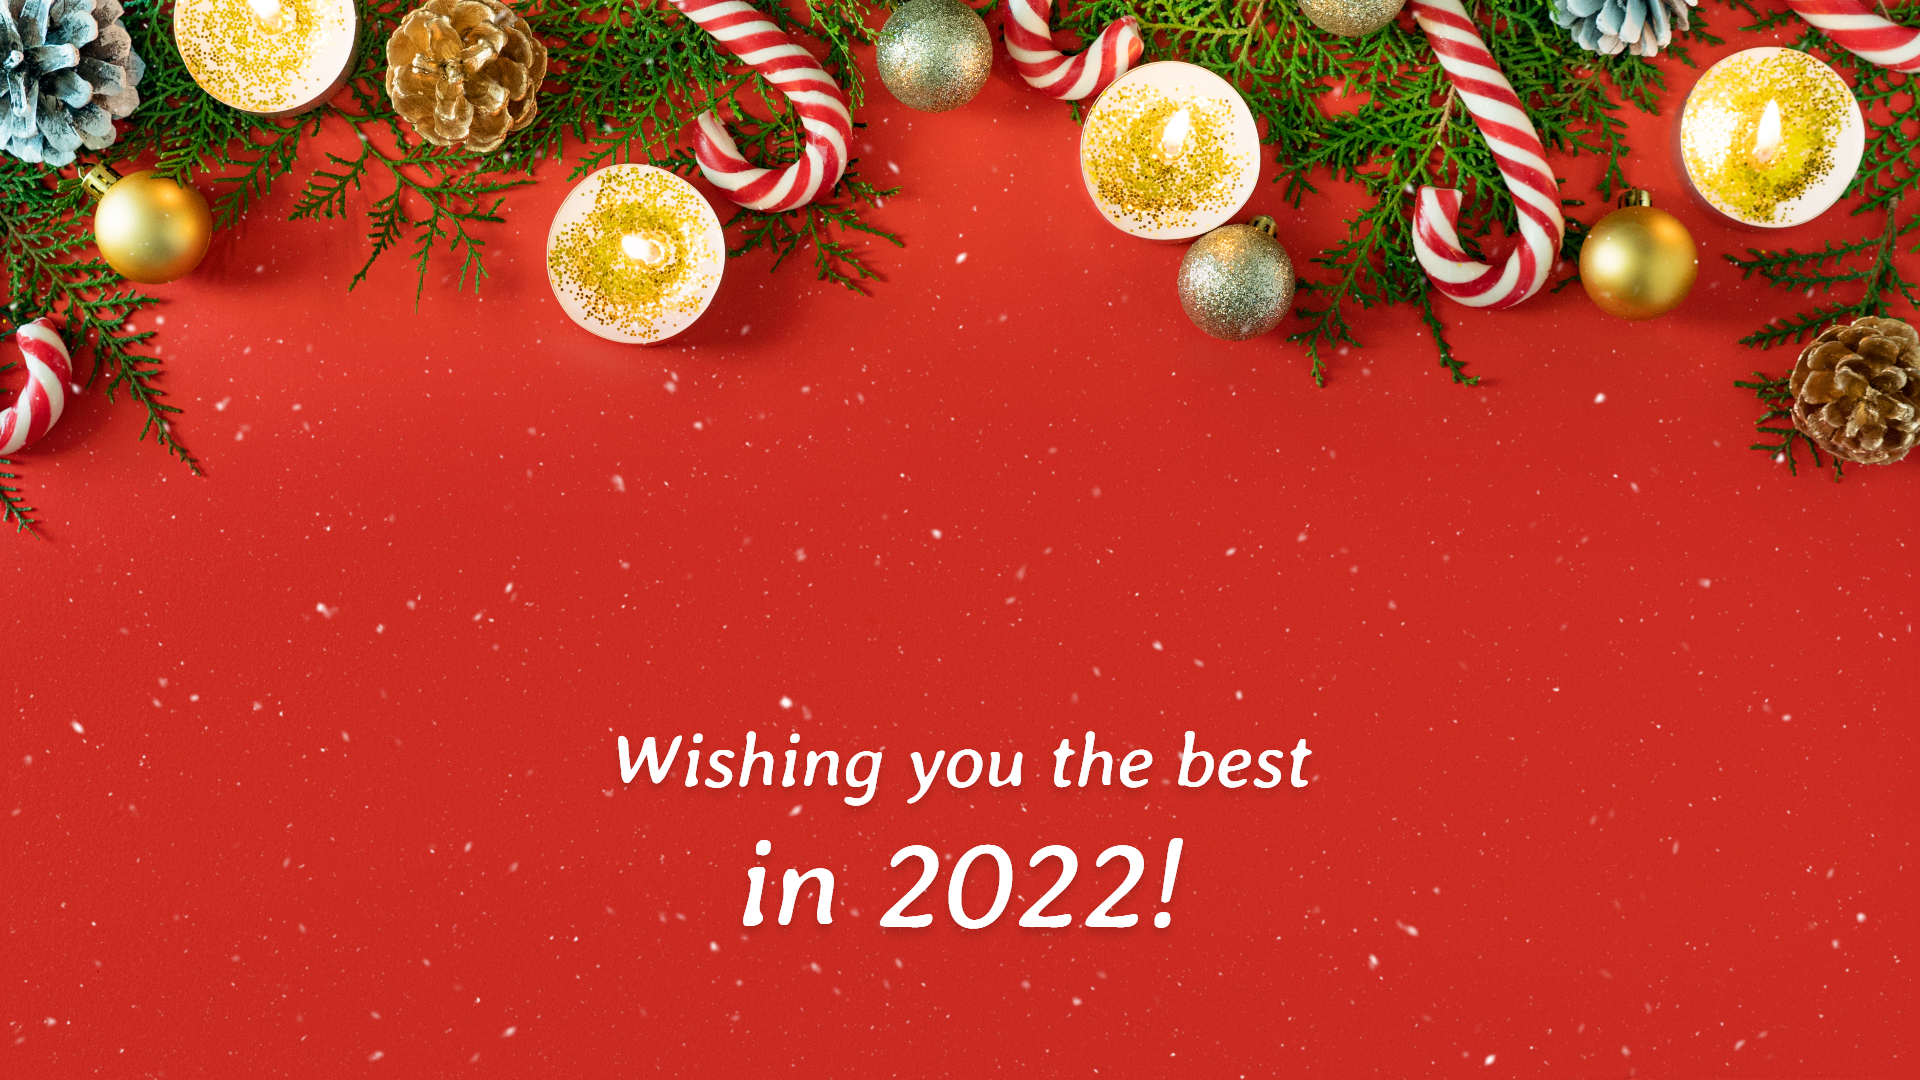 20+ Christmas Wallpapers & Backgrounds for Your Holiday Celebration | Fotor